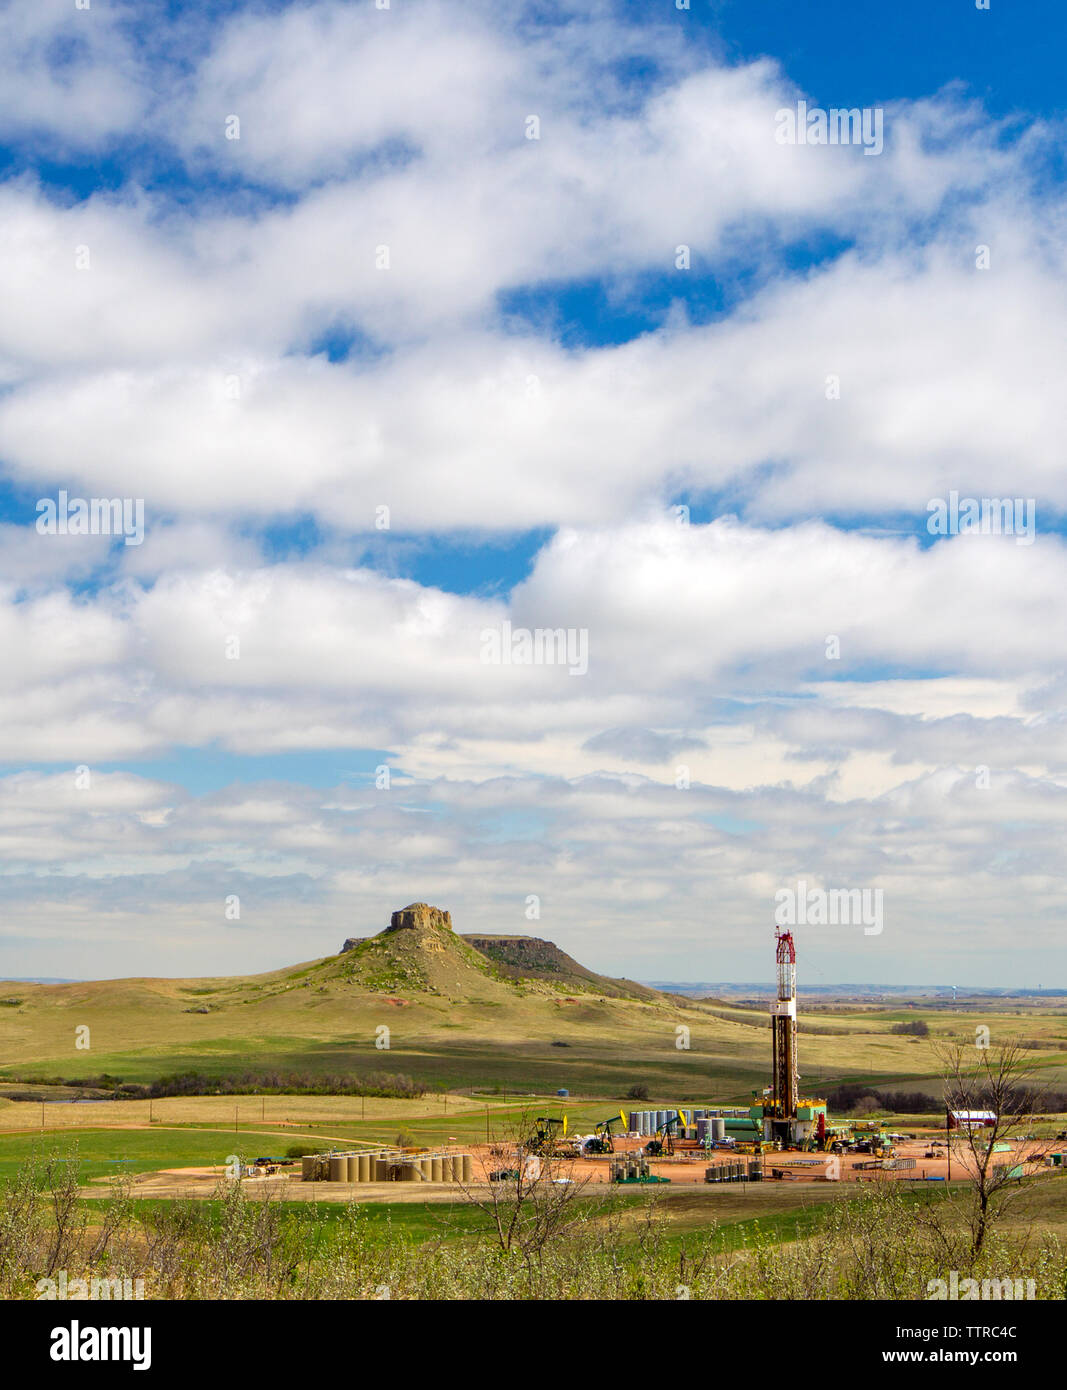 Oil production platform on field against cloudy sky Stock Photo